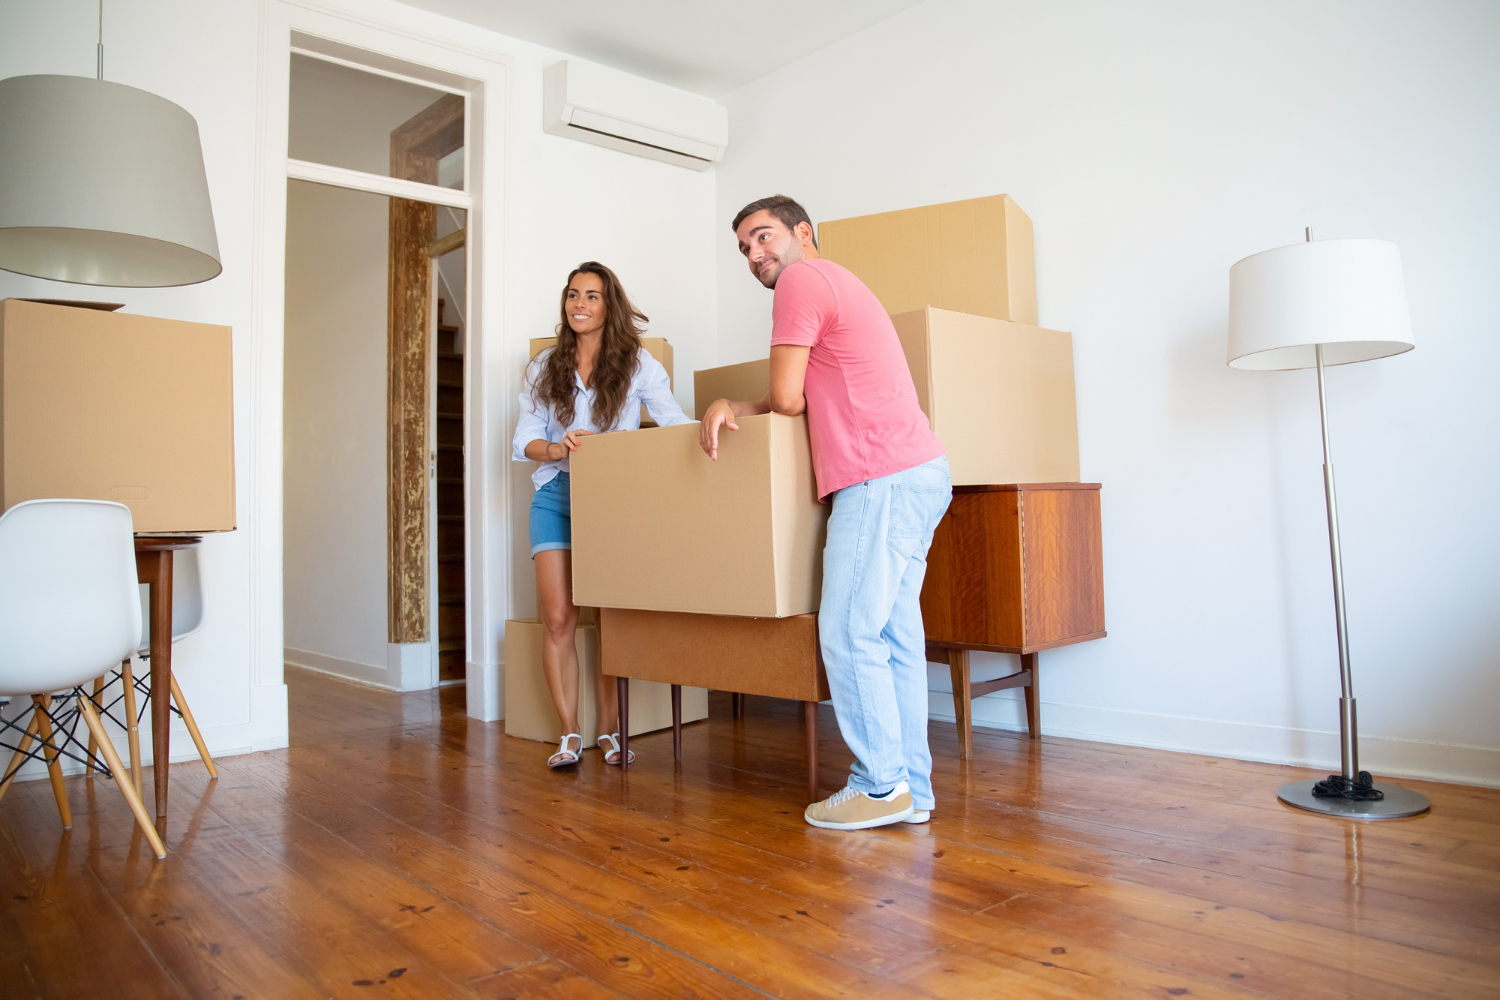 positive-young-couple-looking-their-new-apartment-while-standing-leaning-cardboard-boxes-furniture-indoors